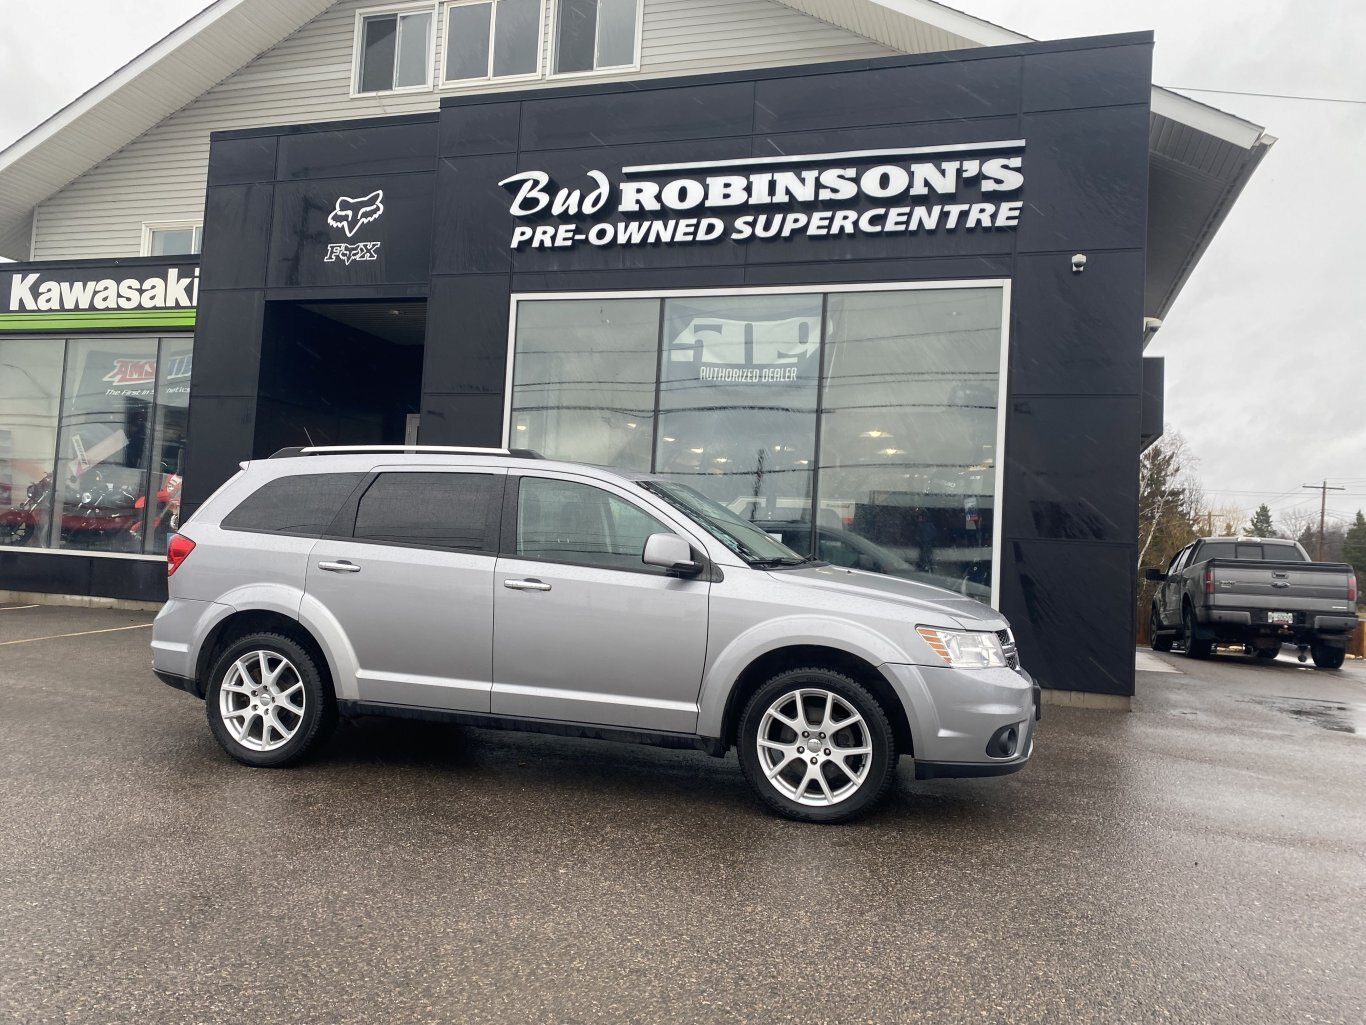 2016 DODGE JOURNEY R/T AWD WITH LEATHER SEATS, HEATED SEATS AND REAR VIEW CAMERA!!